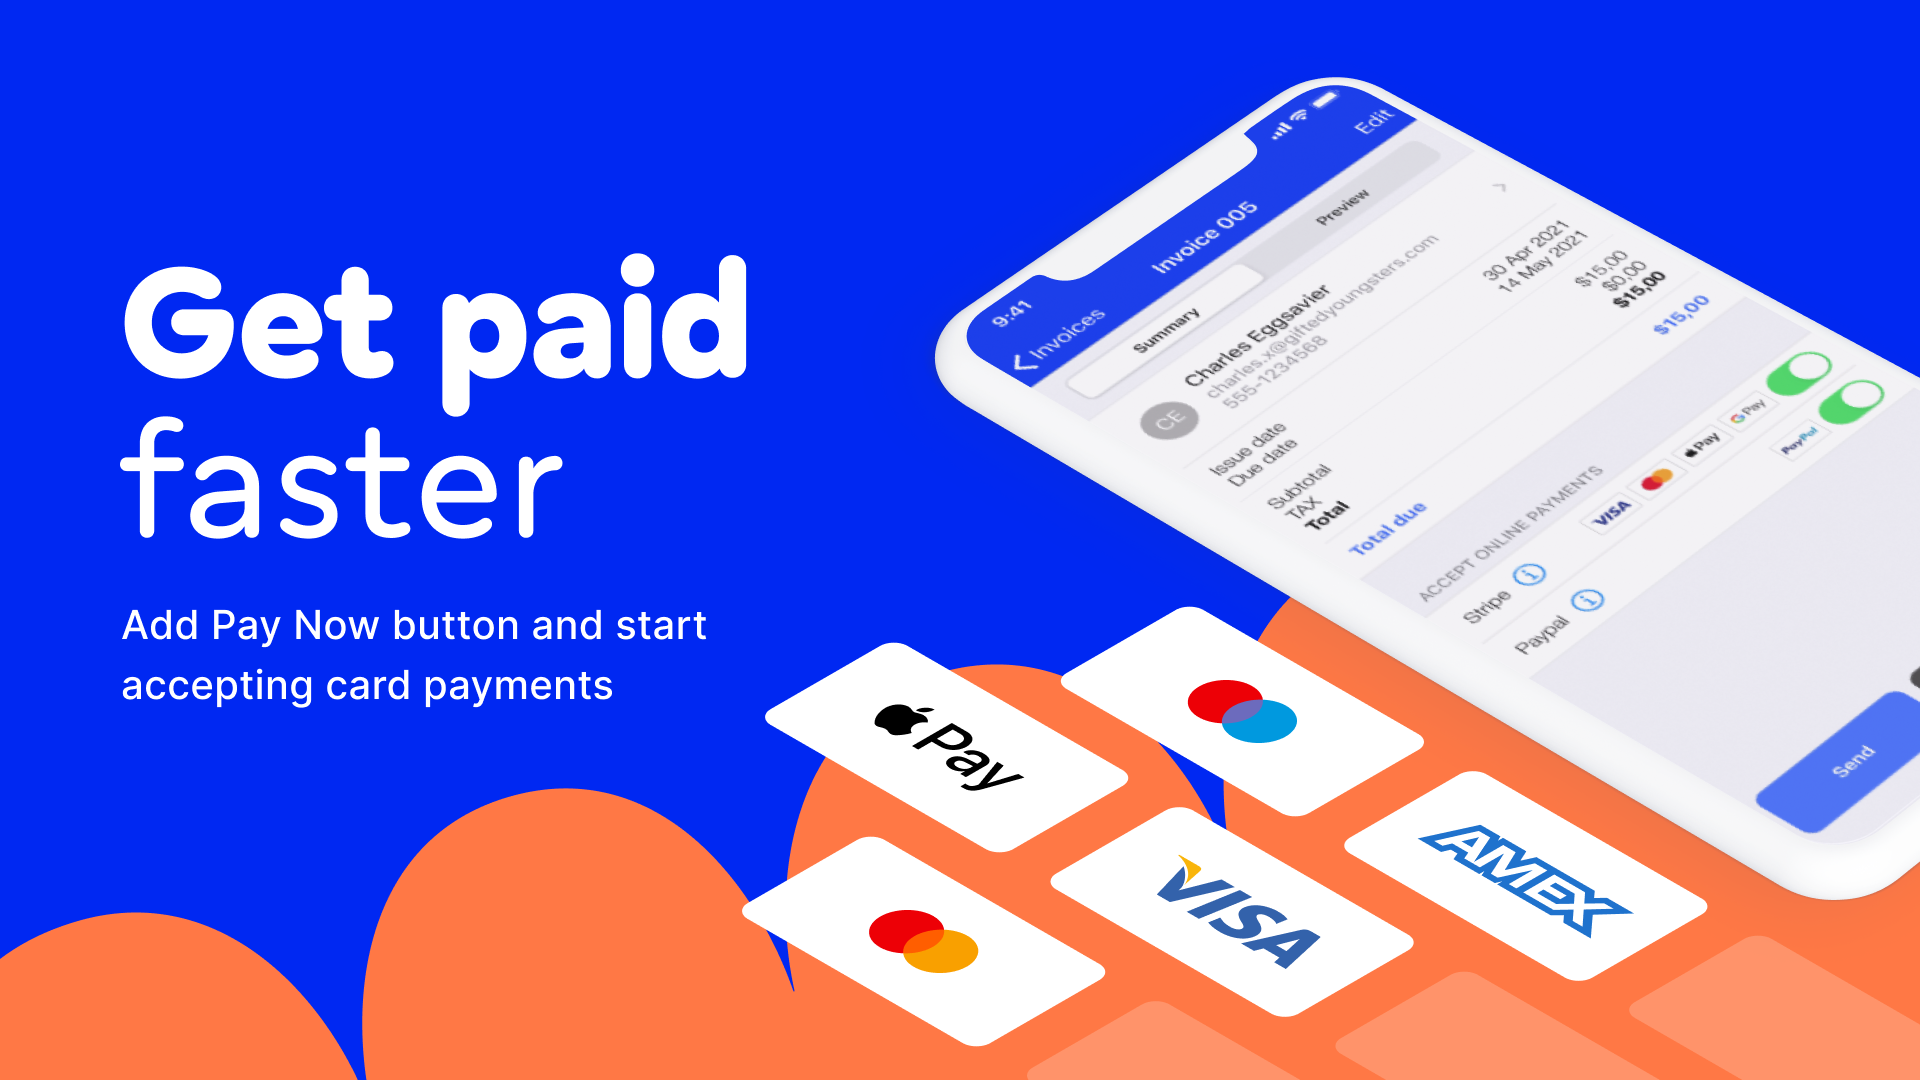 Get paid faster by accepting card payments on your invoices.